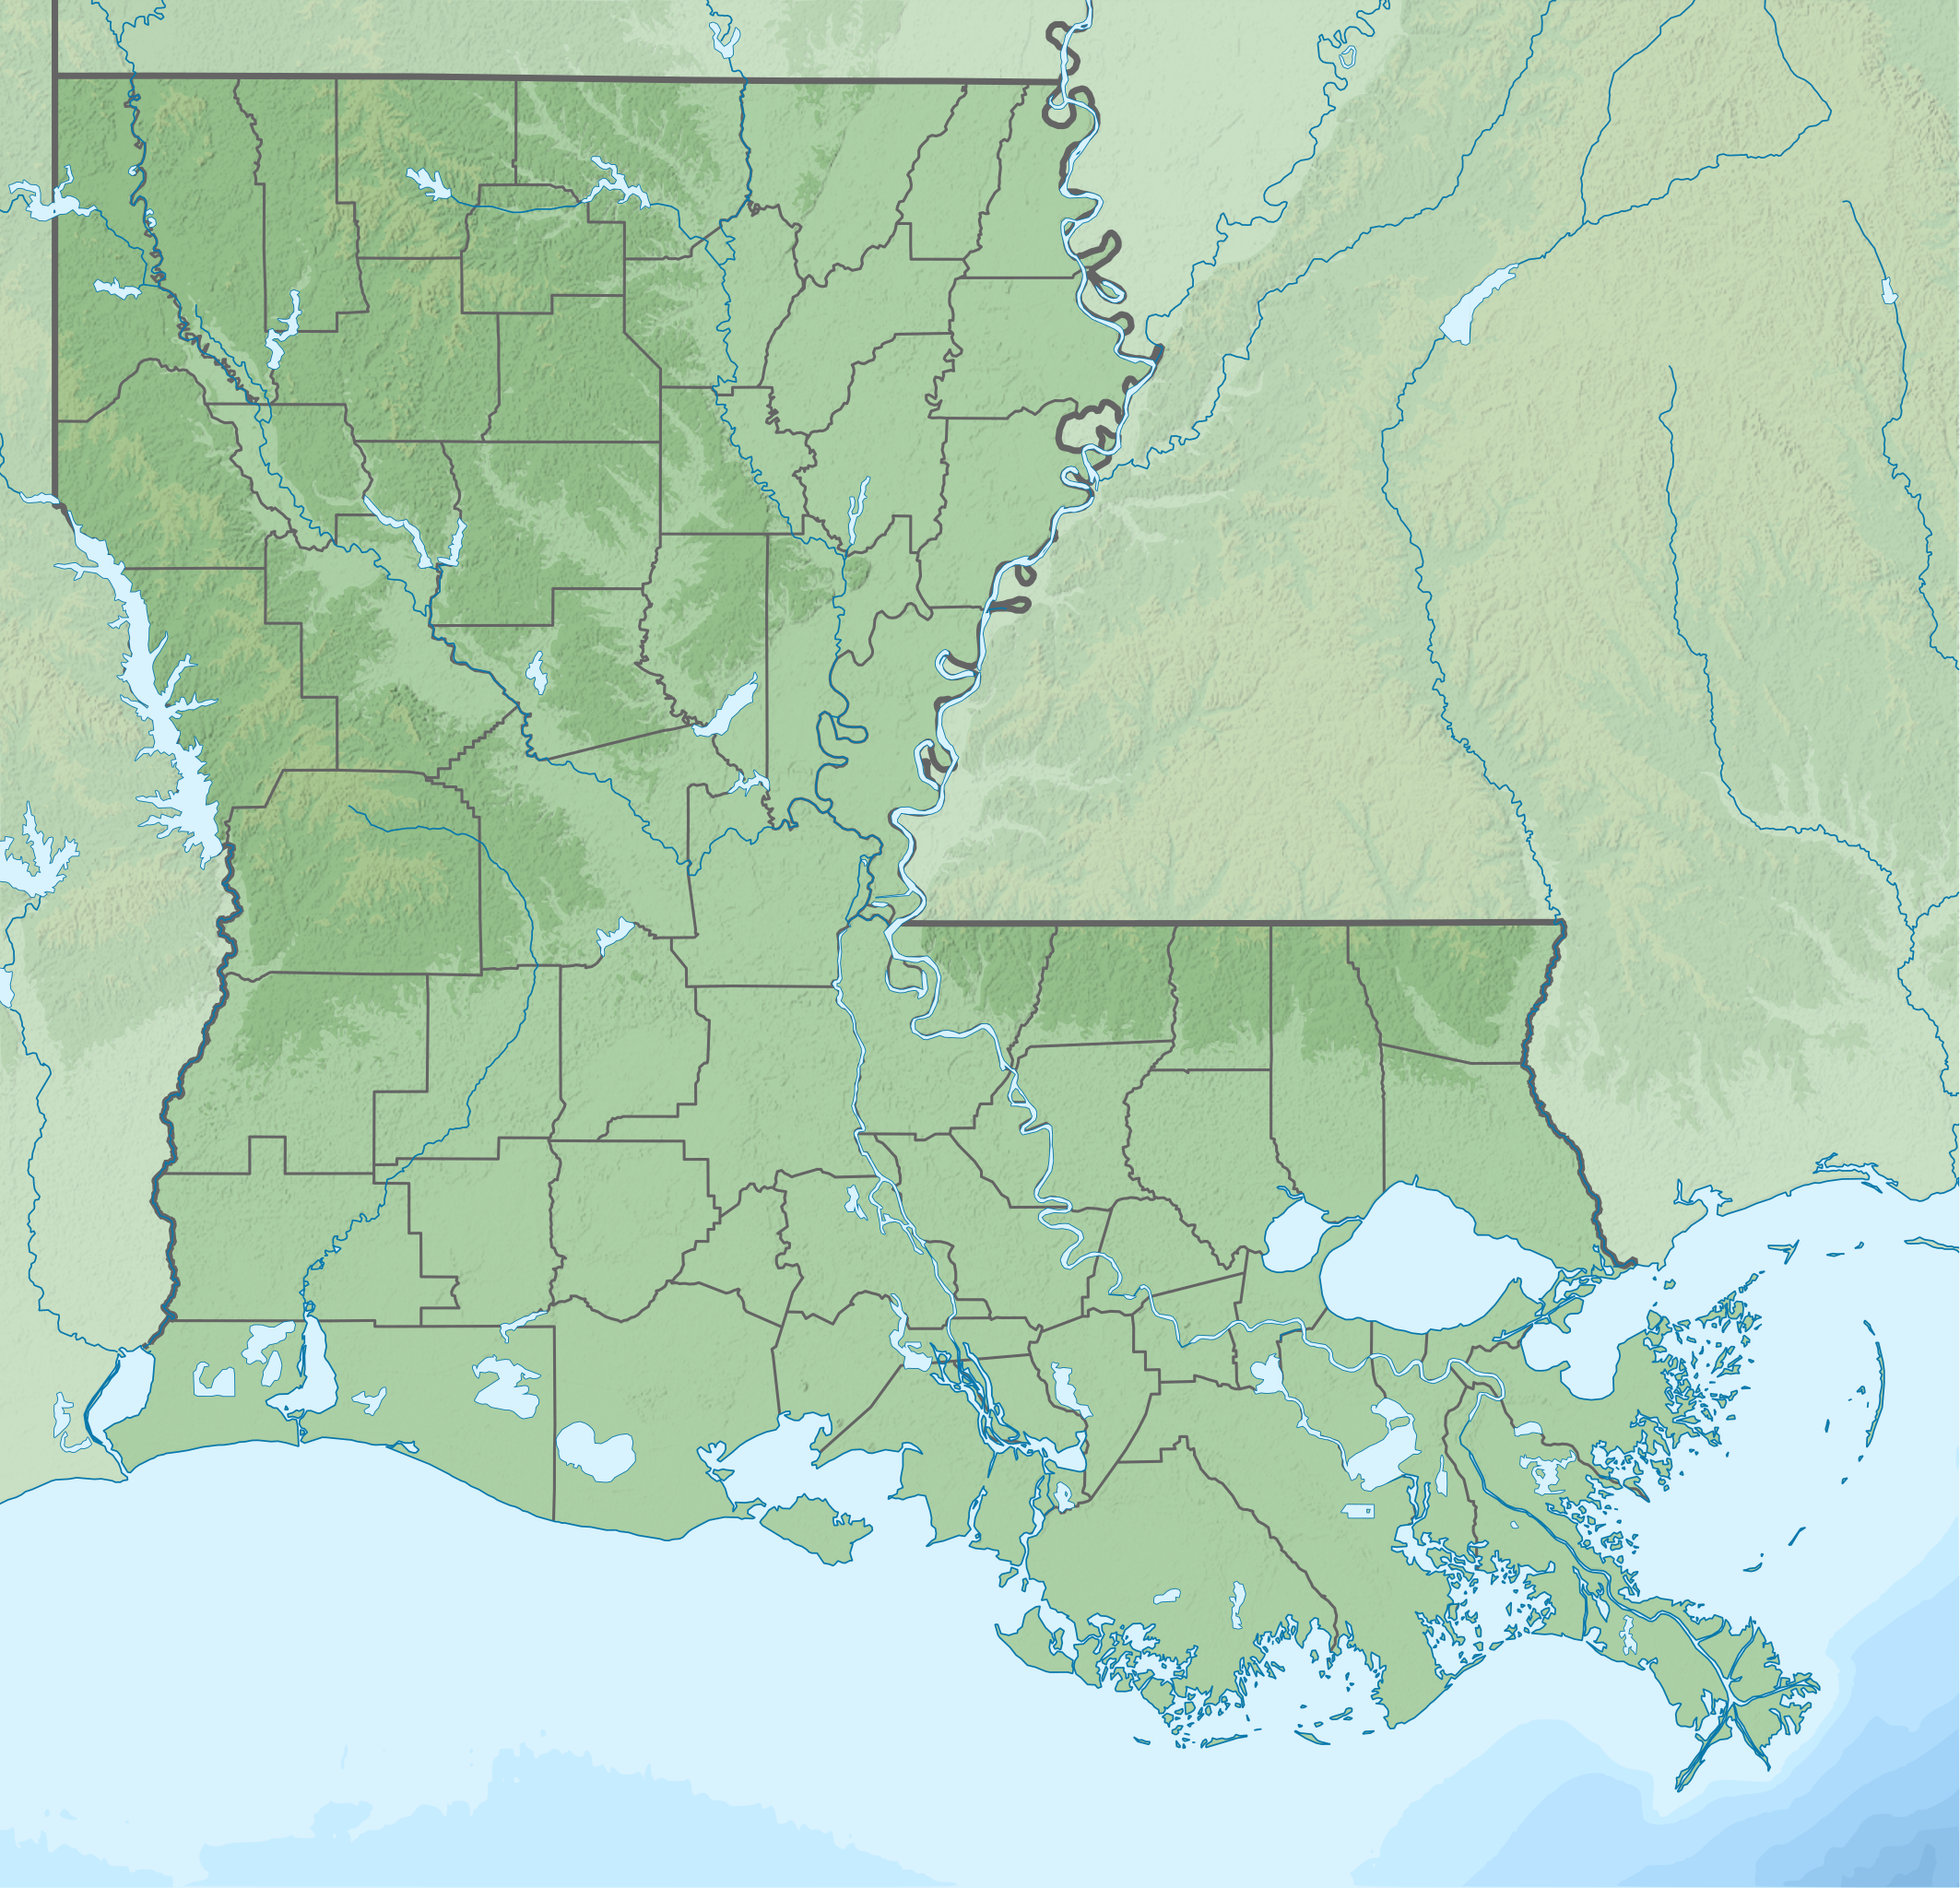 Louisiana state map with contact information markers